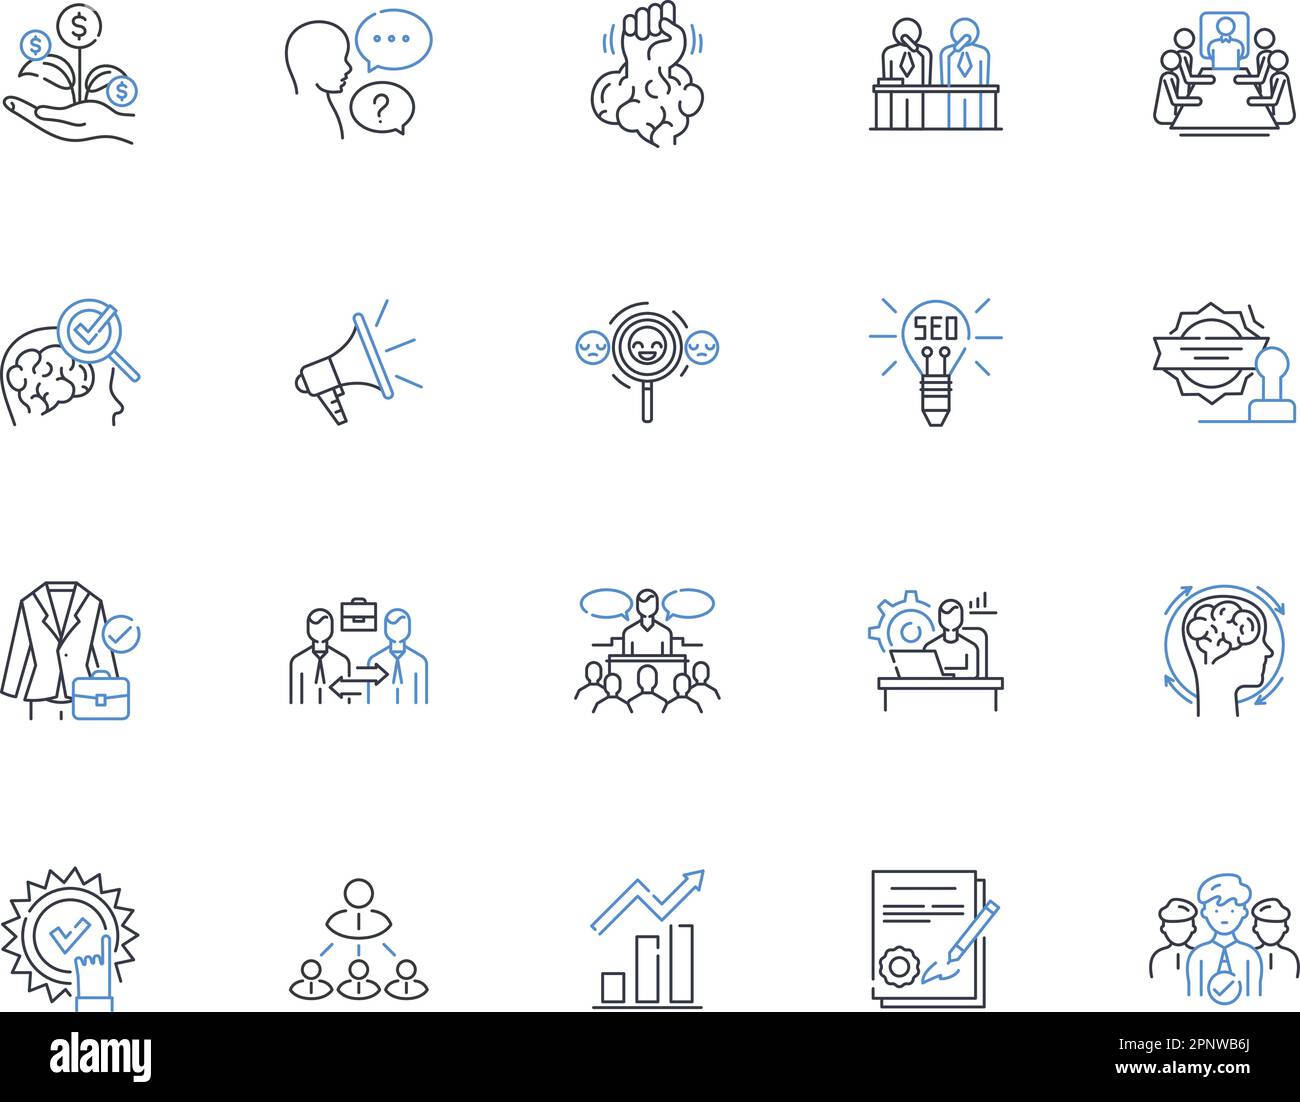 Consumer insights line icons collection. Behaviors, Needs, Lifestyles, Preferences, Habits, Desires, Trends vector and linear illustration. Attitudes Stock Vector